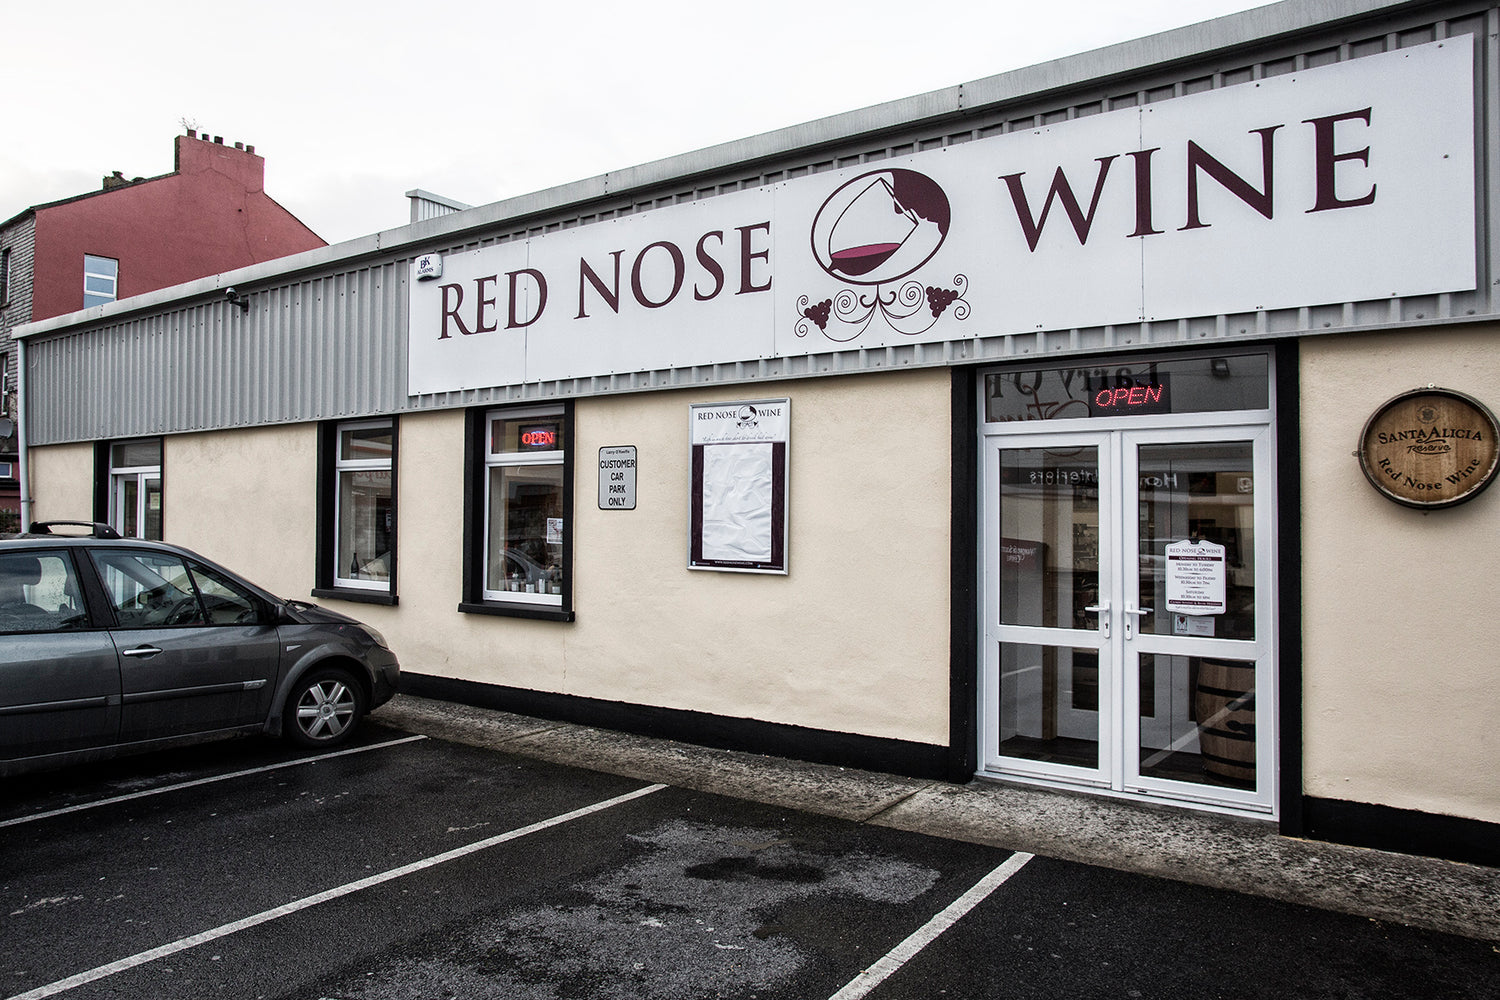 About Red Nose Wine